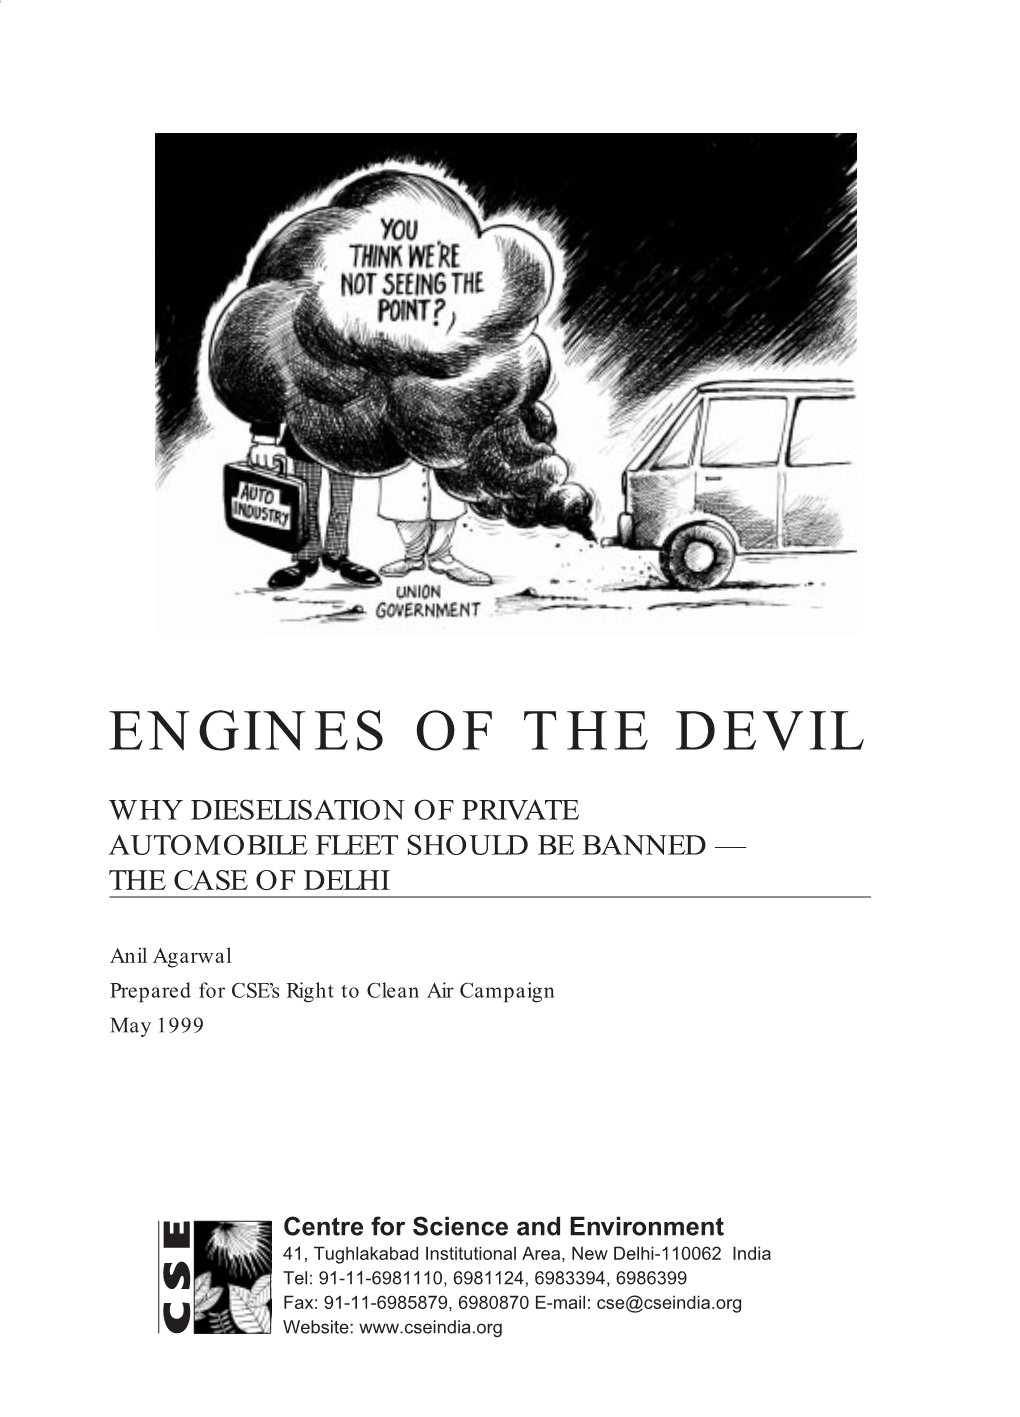 Engines of the Devil